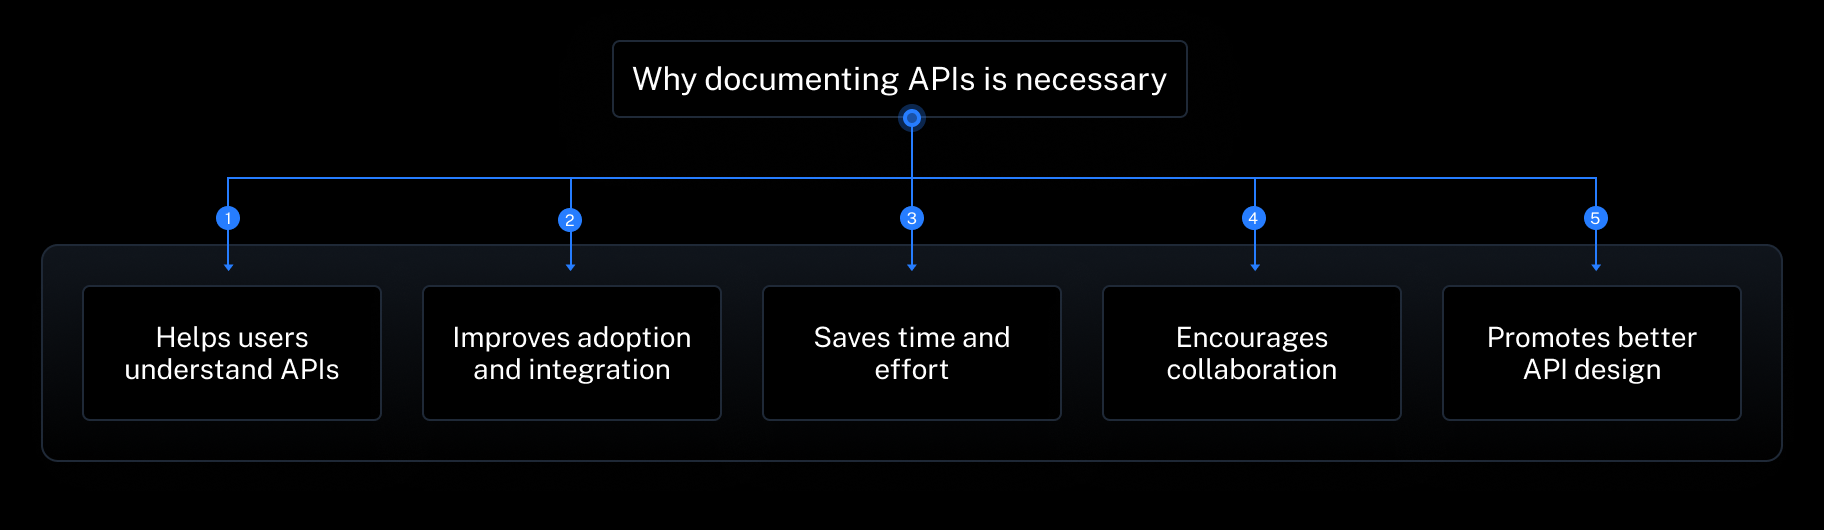 Why documenting APIs is necessary